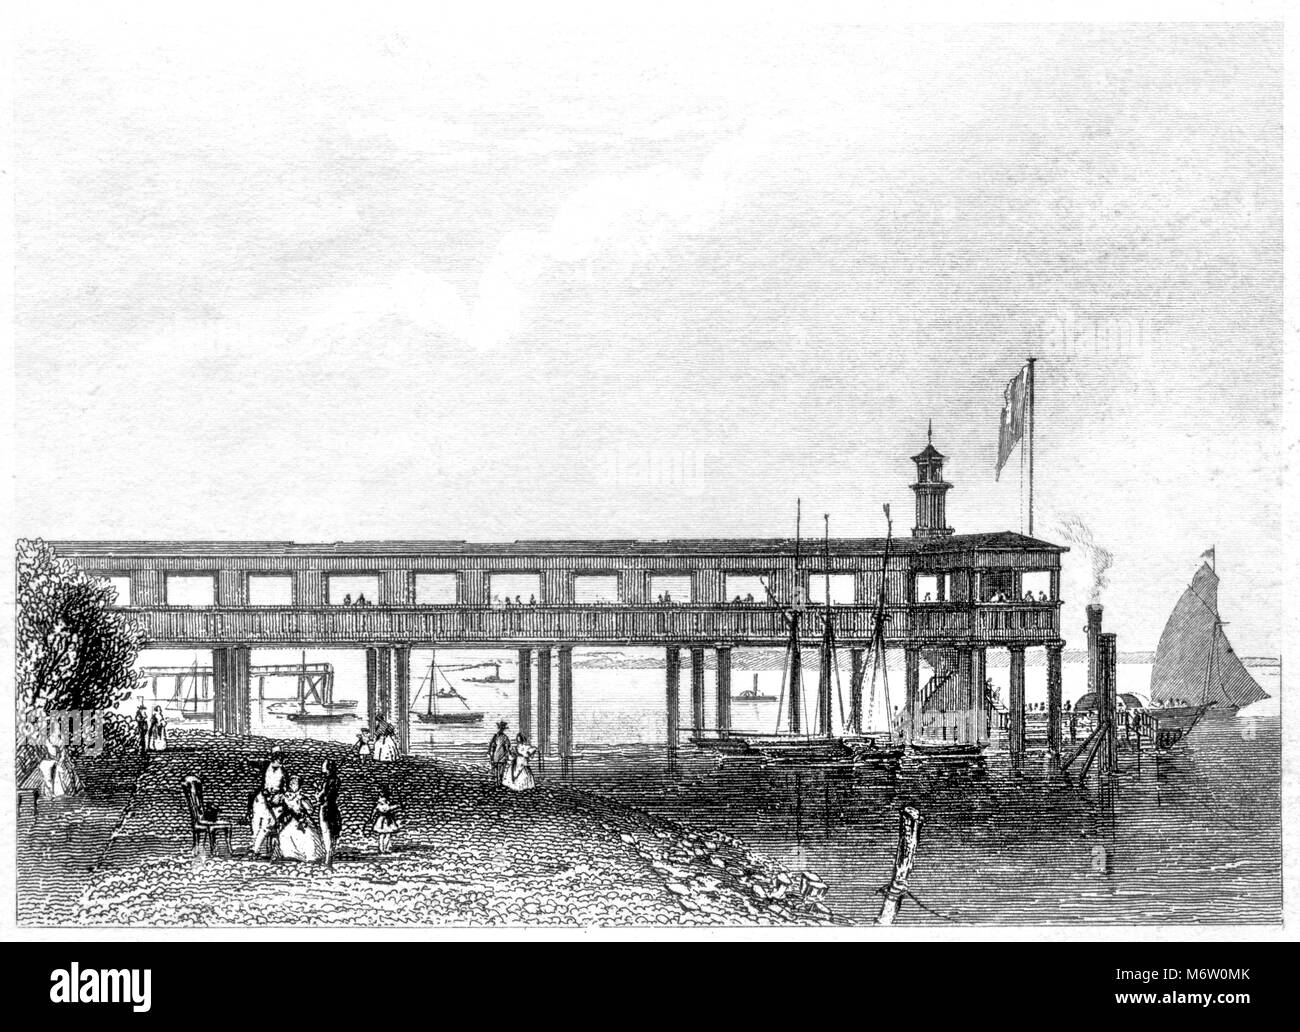 An engraving of Terrace Pier, Gravesend scanned at high resolution from a book printed in 1851. Believed copyright free. Stock Photo